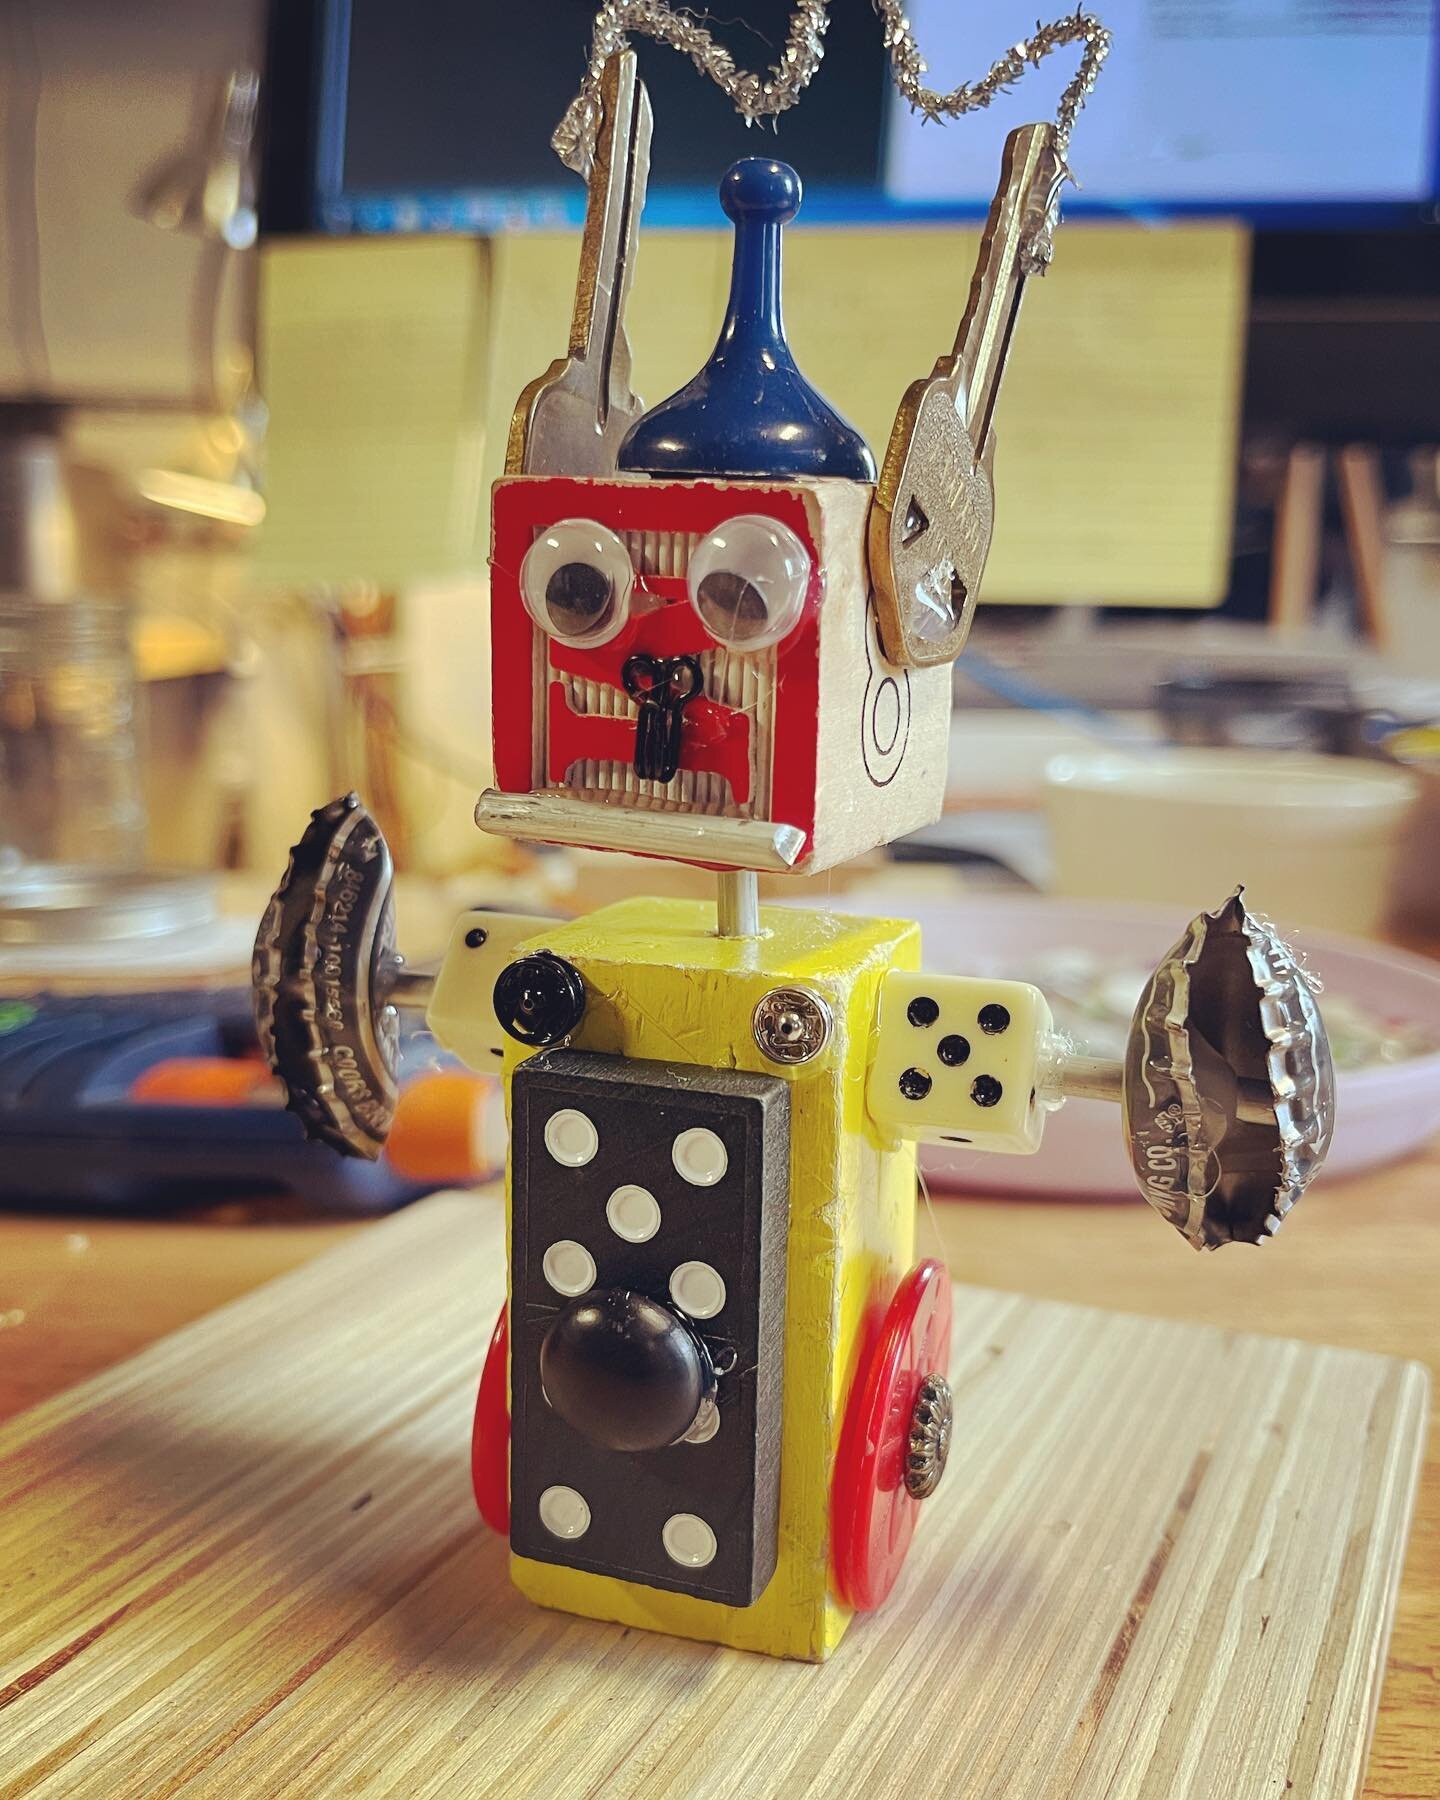 We made this toy bot from the March Makers Kit found @urbansquirrel253 We missed the contest deadline but saw all the really cool and creative submissions. Good job everyone! 

We just grabbed the April makers kit and are super excited to get creativ